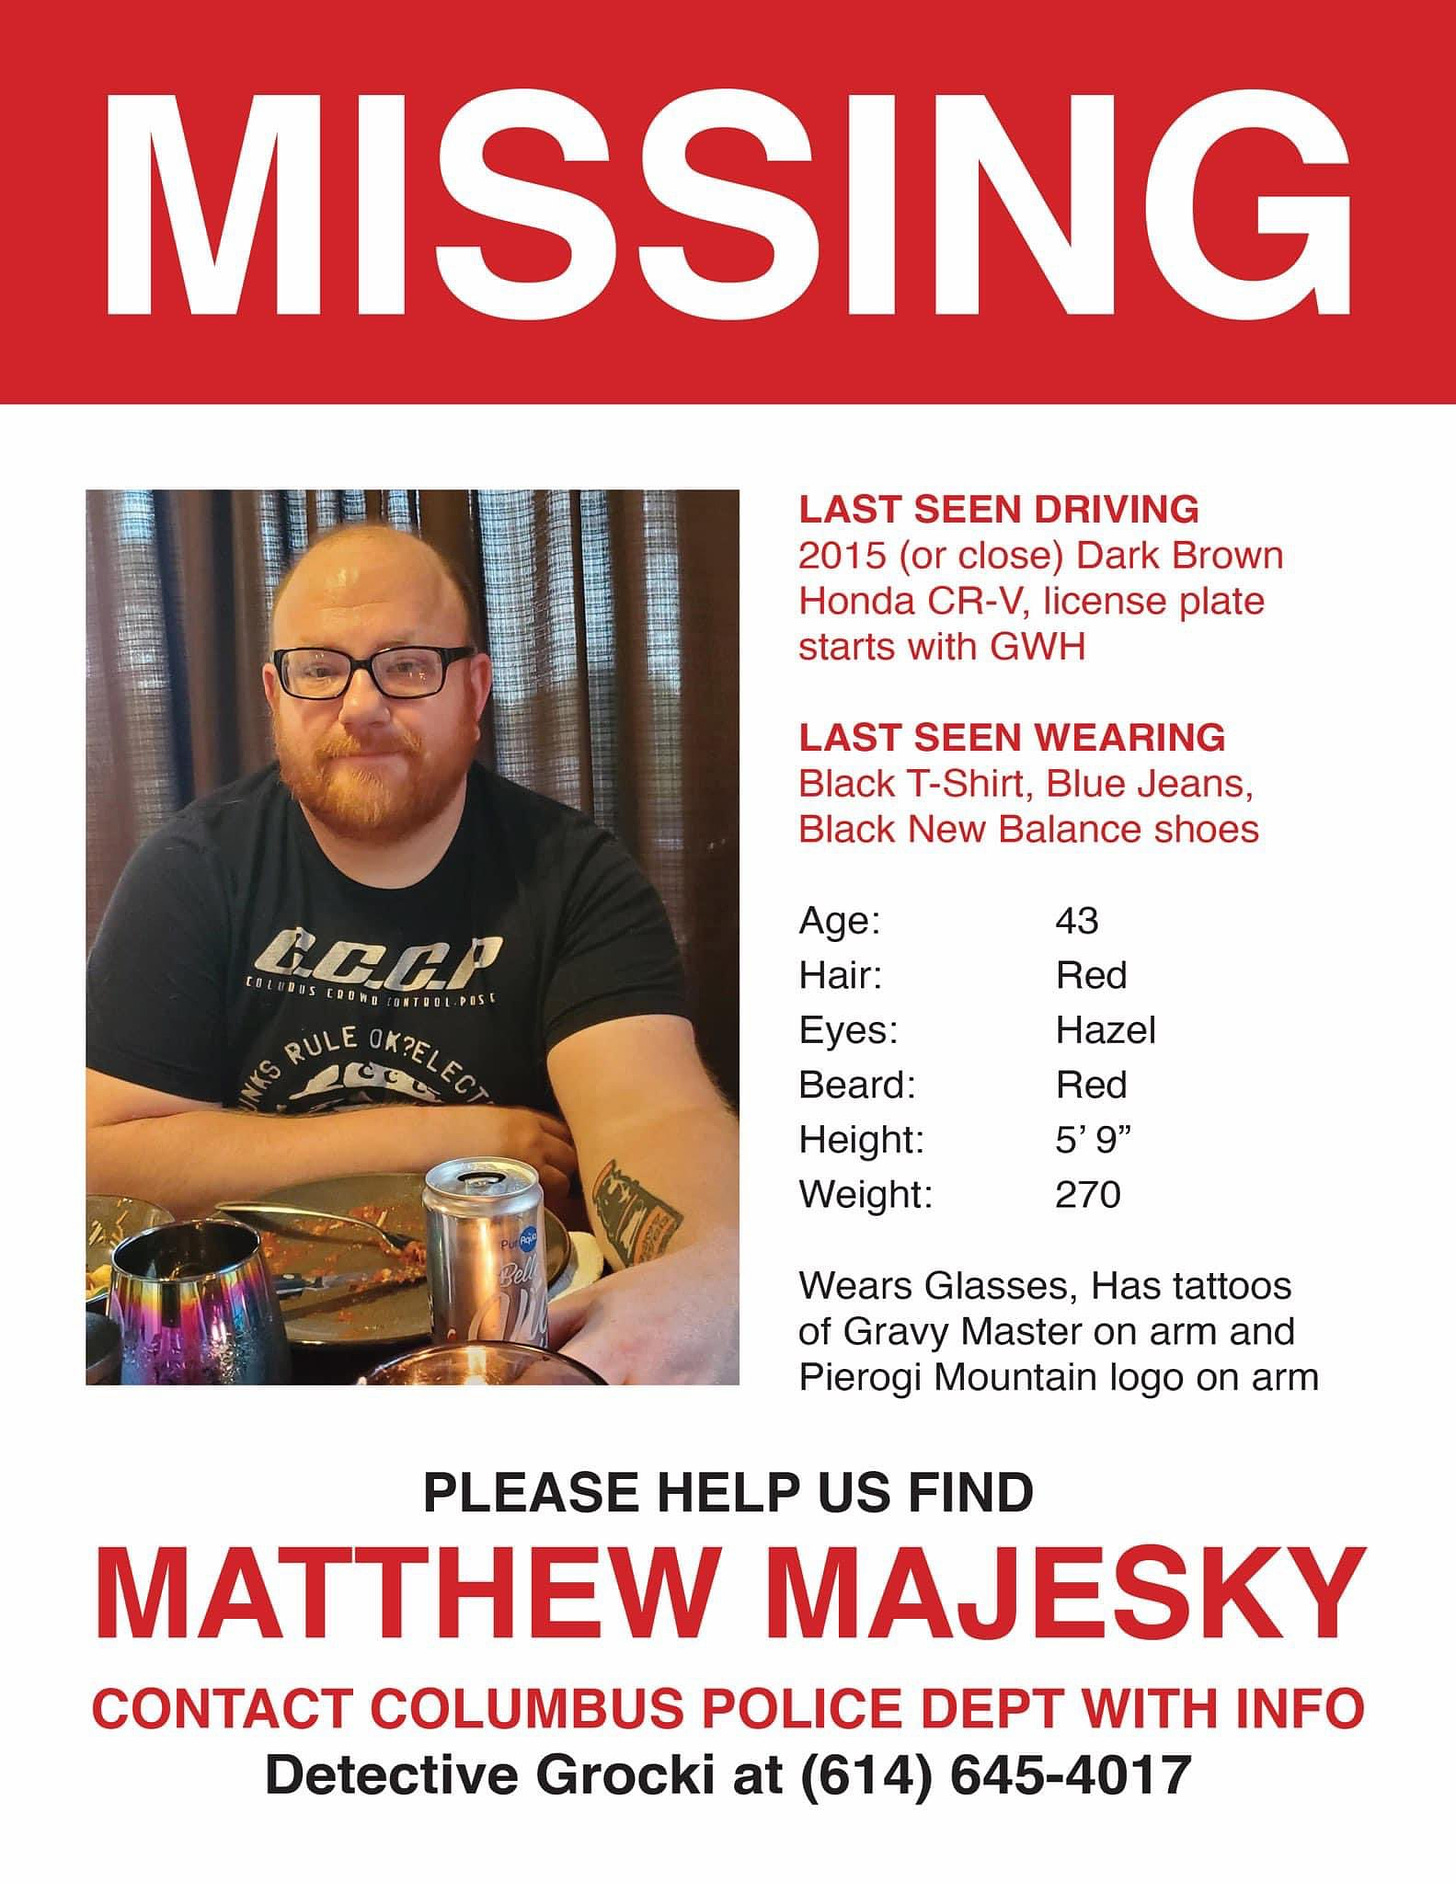 MISSING - Please help us find MATTHEW MAJESKY - Last seen driving a 2015 (or close) dark brown Honda CR-V, license plate starts with GWH - Last seen wearing black t-shirt, blue jeans, black New Balance shoes - Age: 43 - Hair: Red - Eyes: Hazel - Beard: Red - Height: 5'9 - Weight: 270 - Wears glasses, has tattoo of Gravy Master on arm, has tattoo of Pierogi Mountain logo on arm - Contact Columbus Police Department with Info, Detective Grocki at 614-645-4017